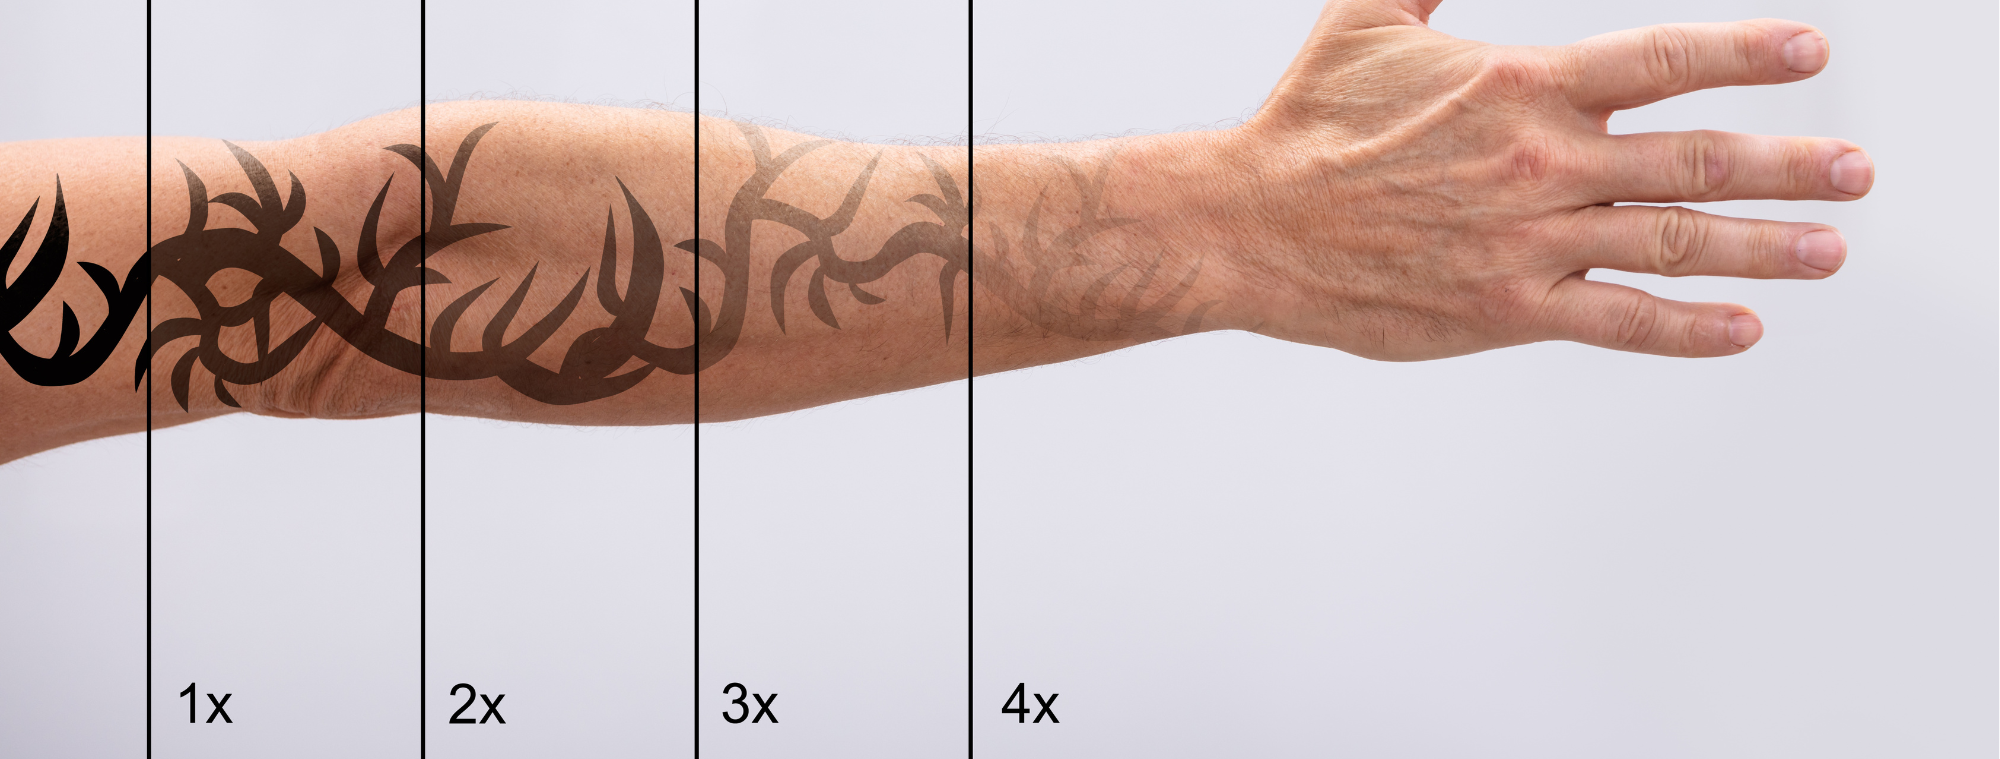 How Much Does Laser Tattoo Removal Cost? | Still Waters Day & Med Spa